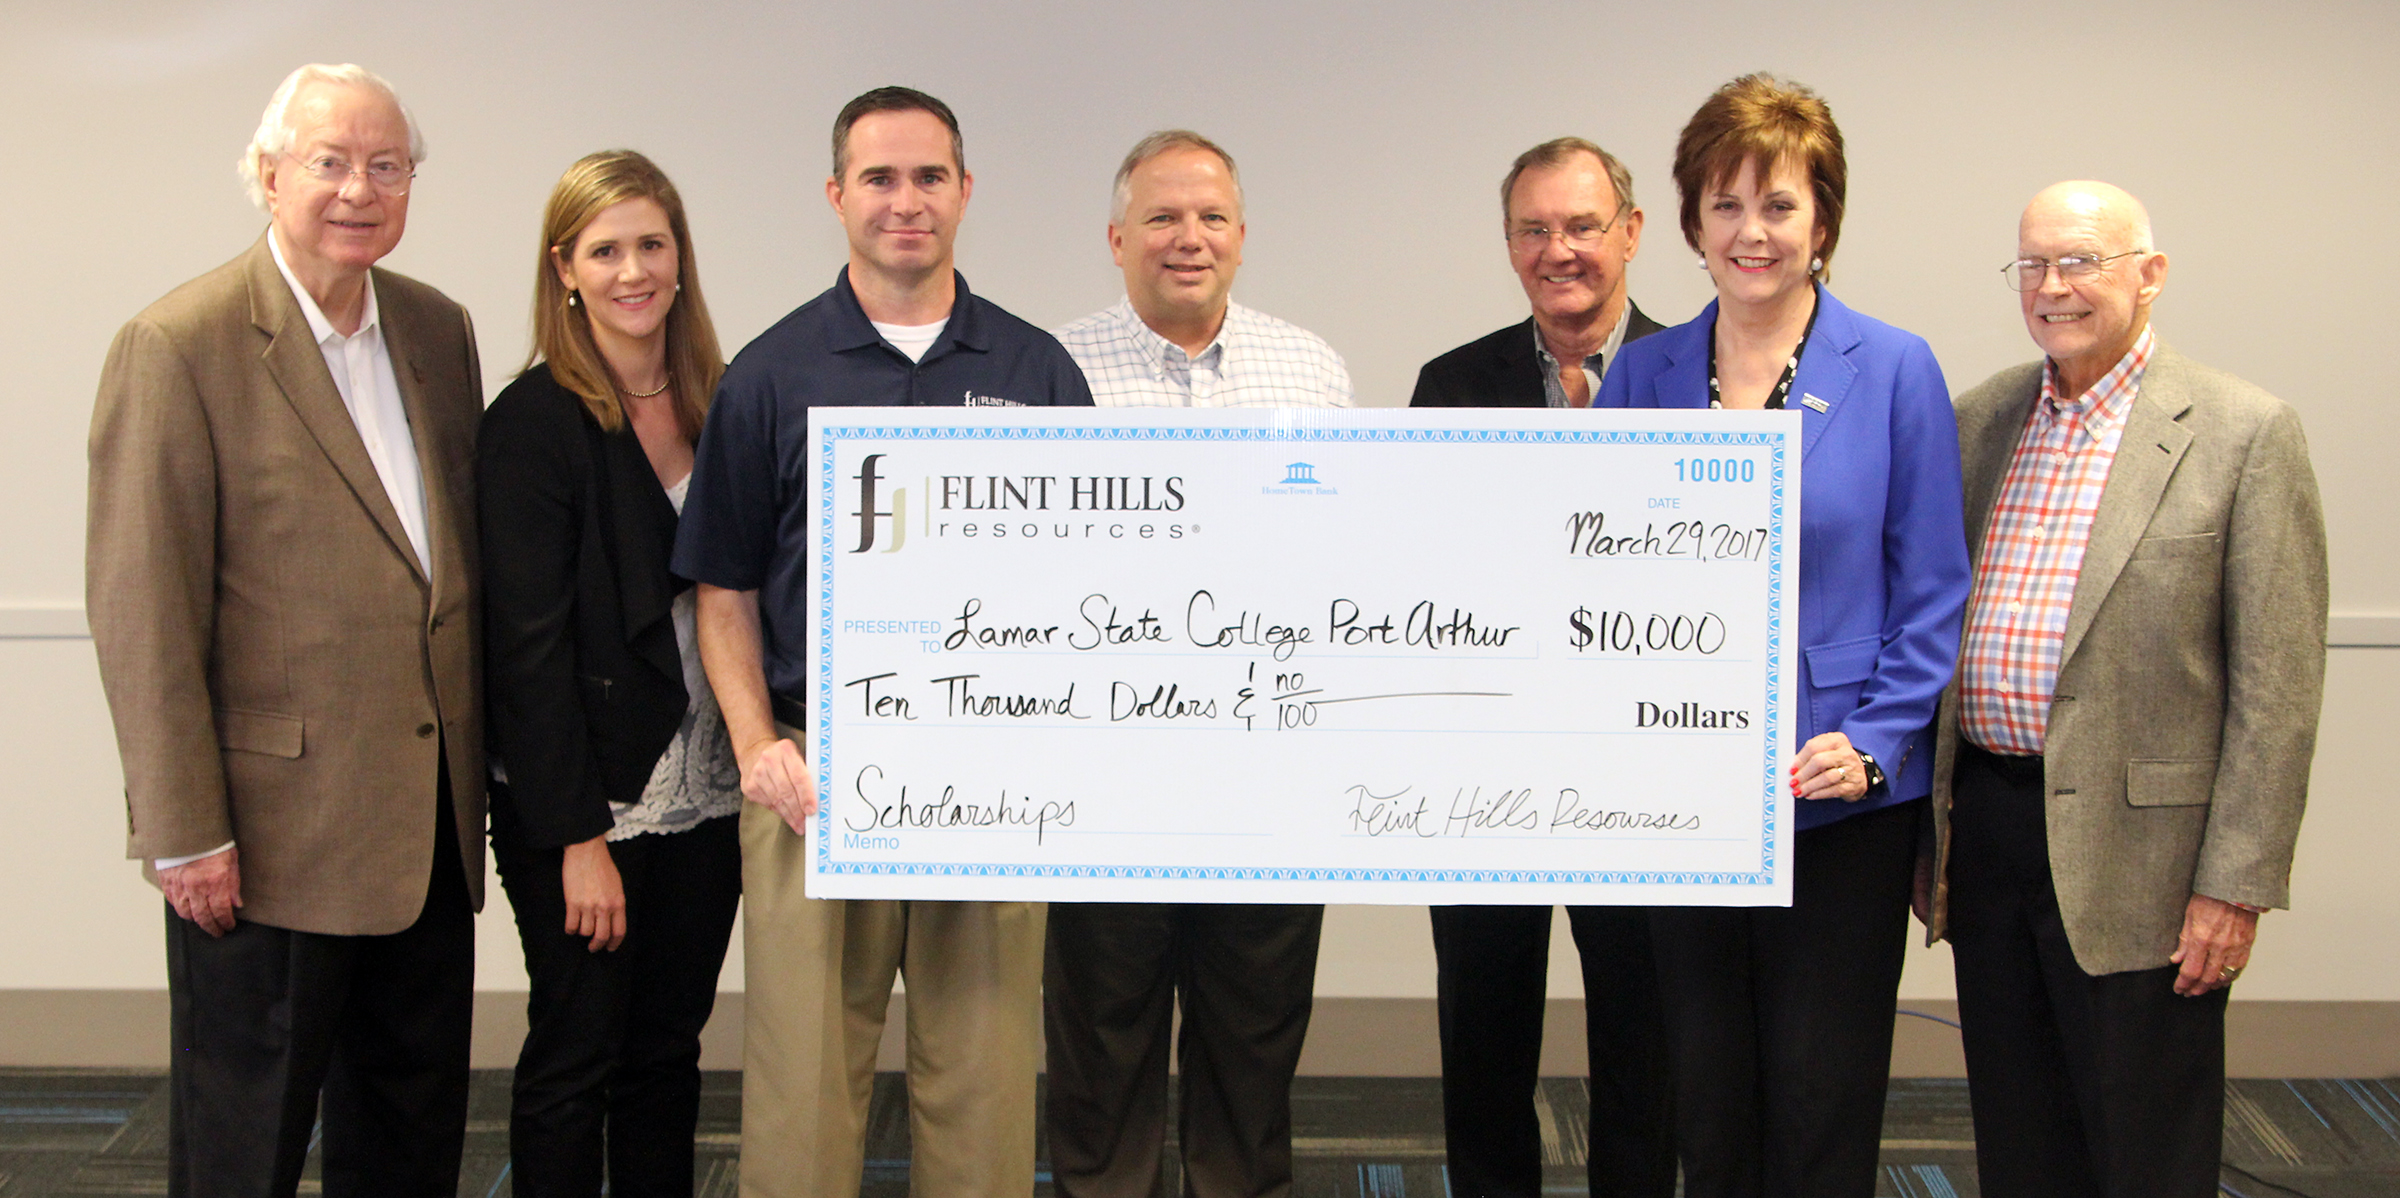 LSCPA and Flint Hills representatives holding a large check for $10,000